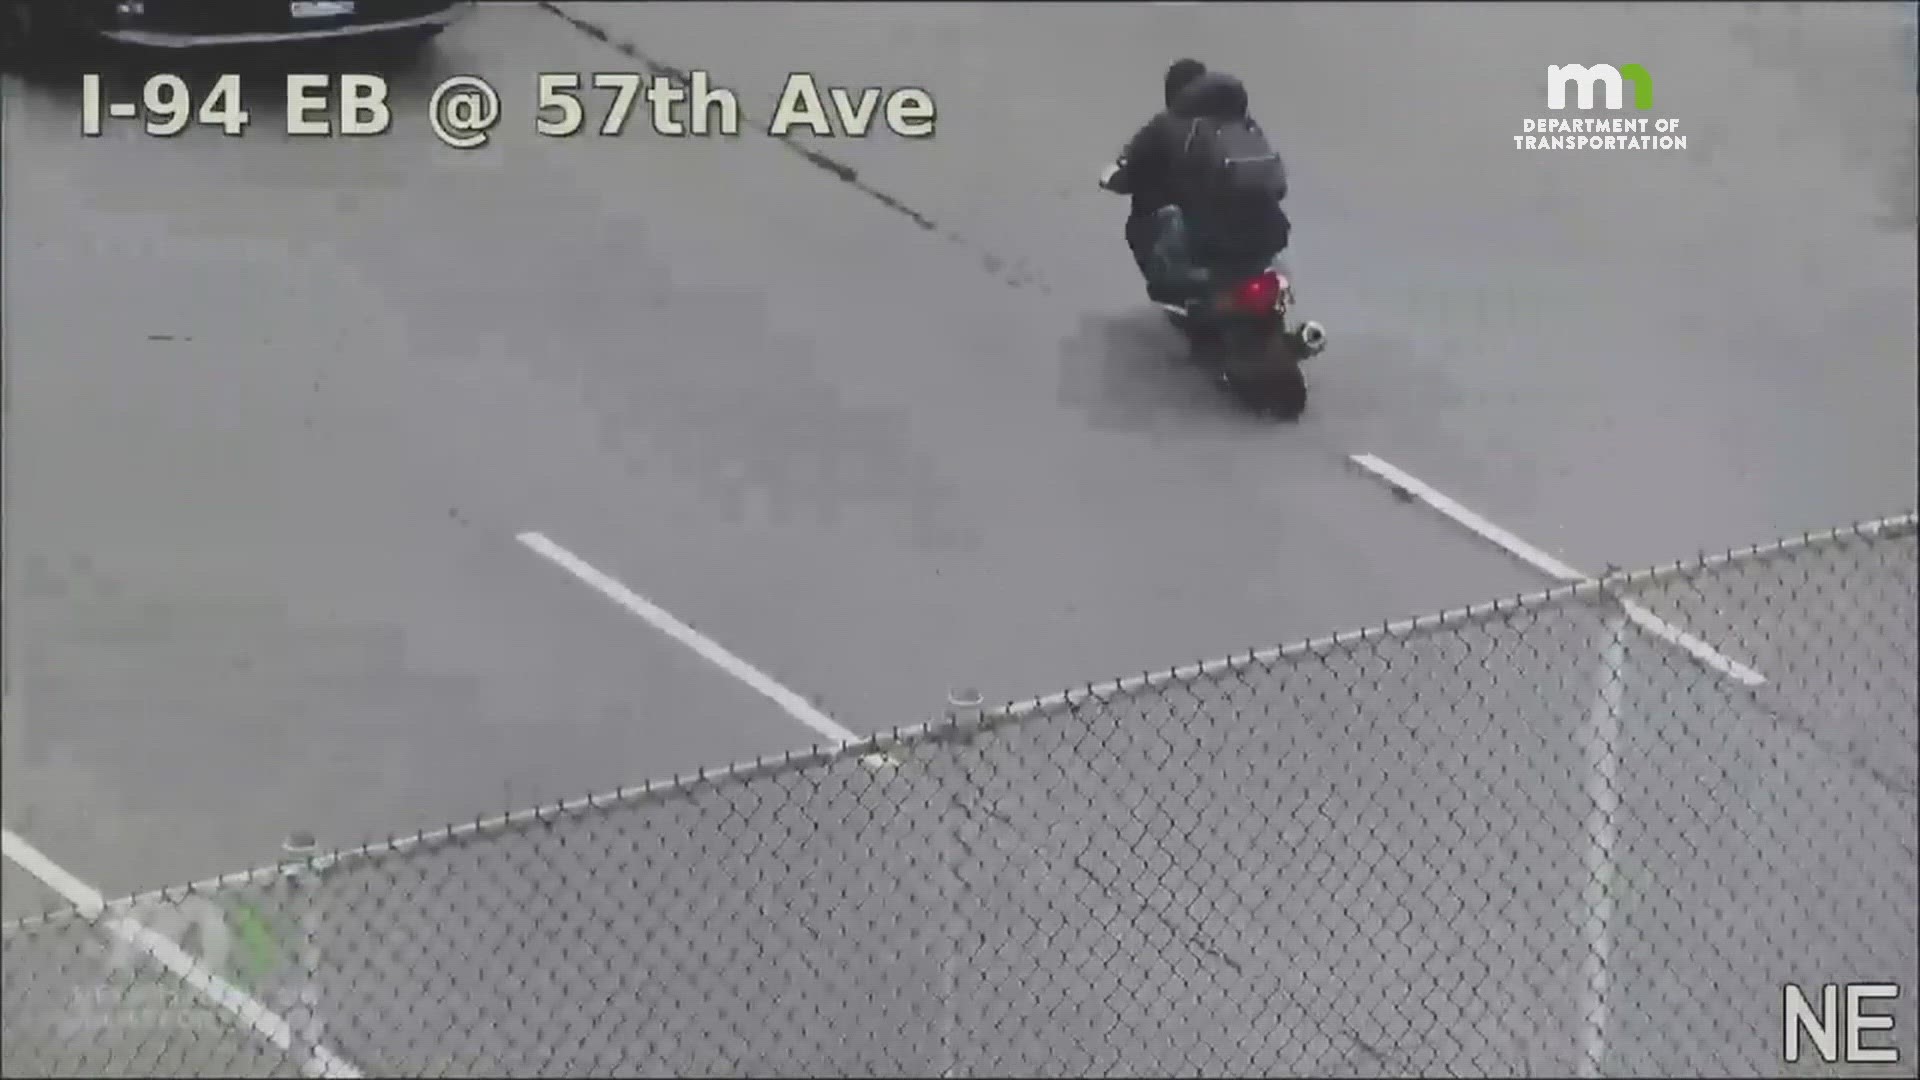 MnDOT traffic cameras first picked up the scooter guy riding directly into traffic. Eventually he ditched the two wheels and jumped on a trailer being towed.